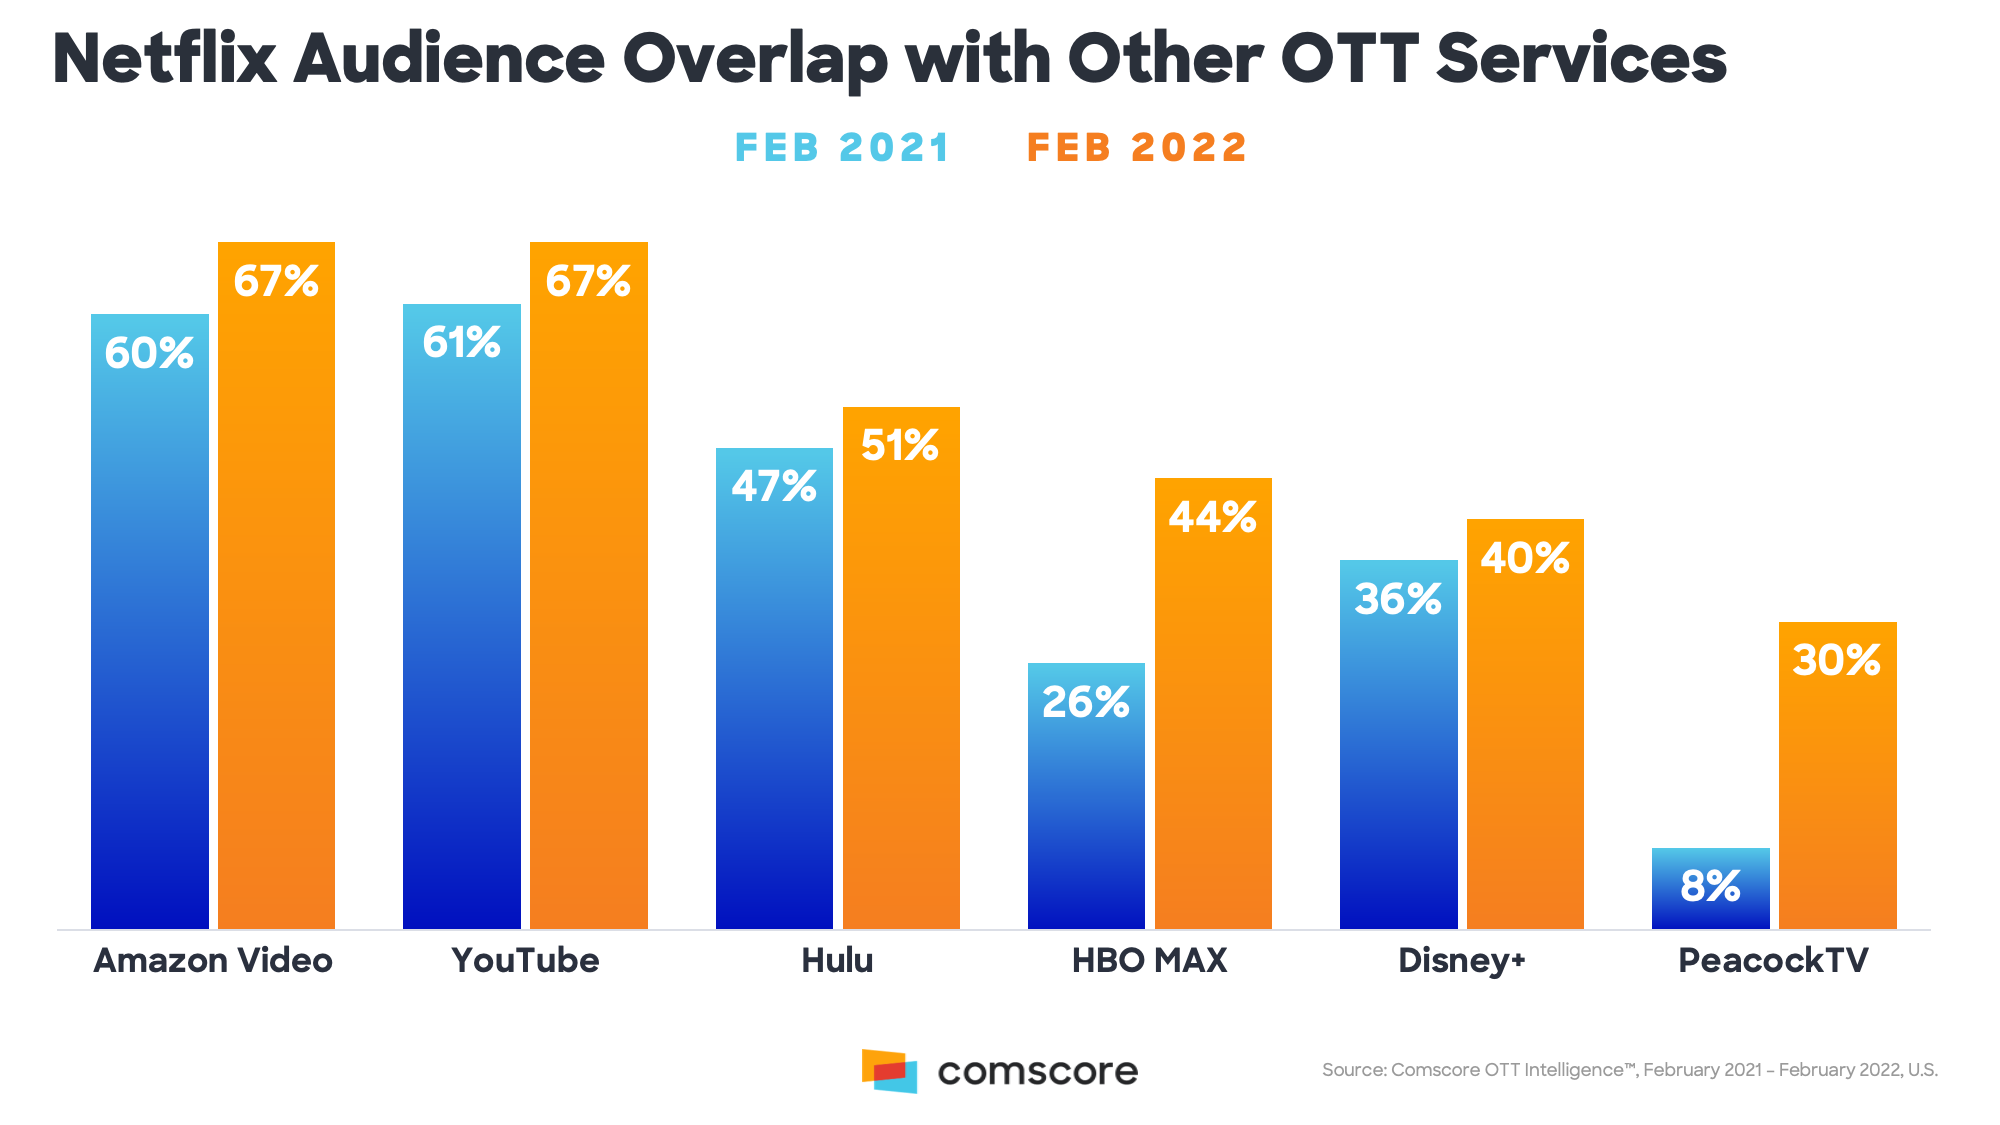 Netflix Audience Overlap with Other OTT Services